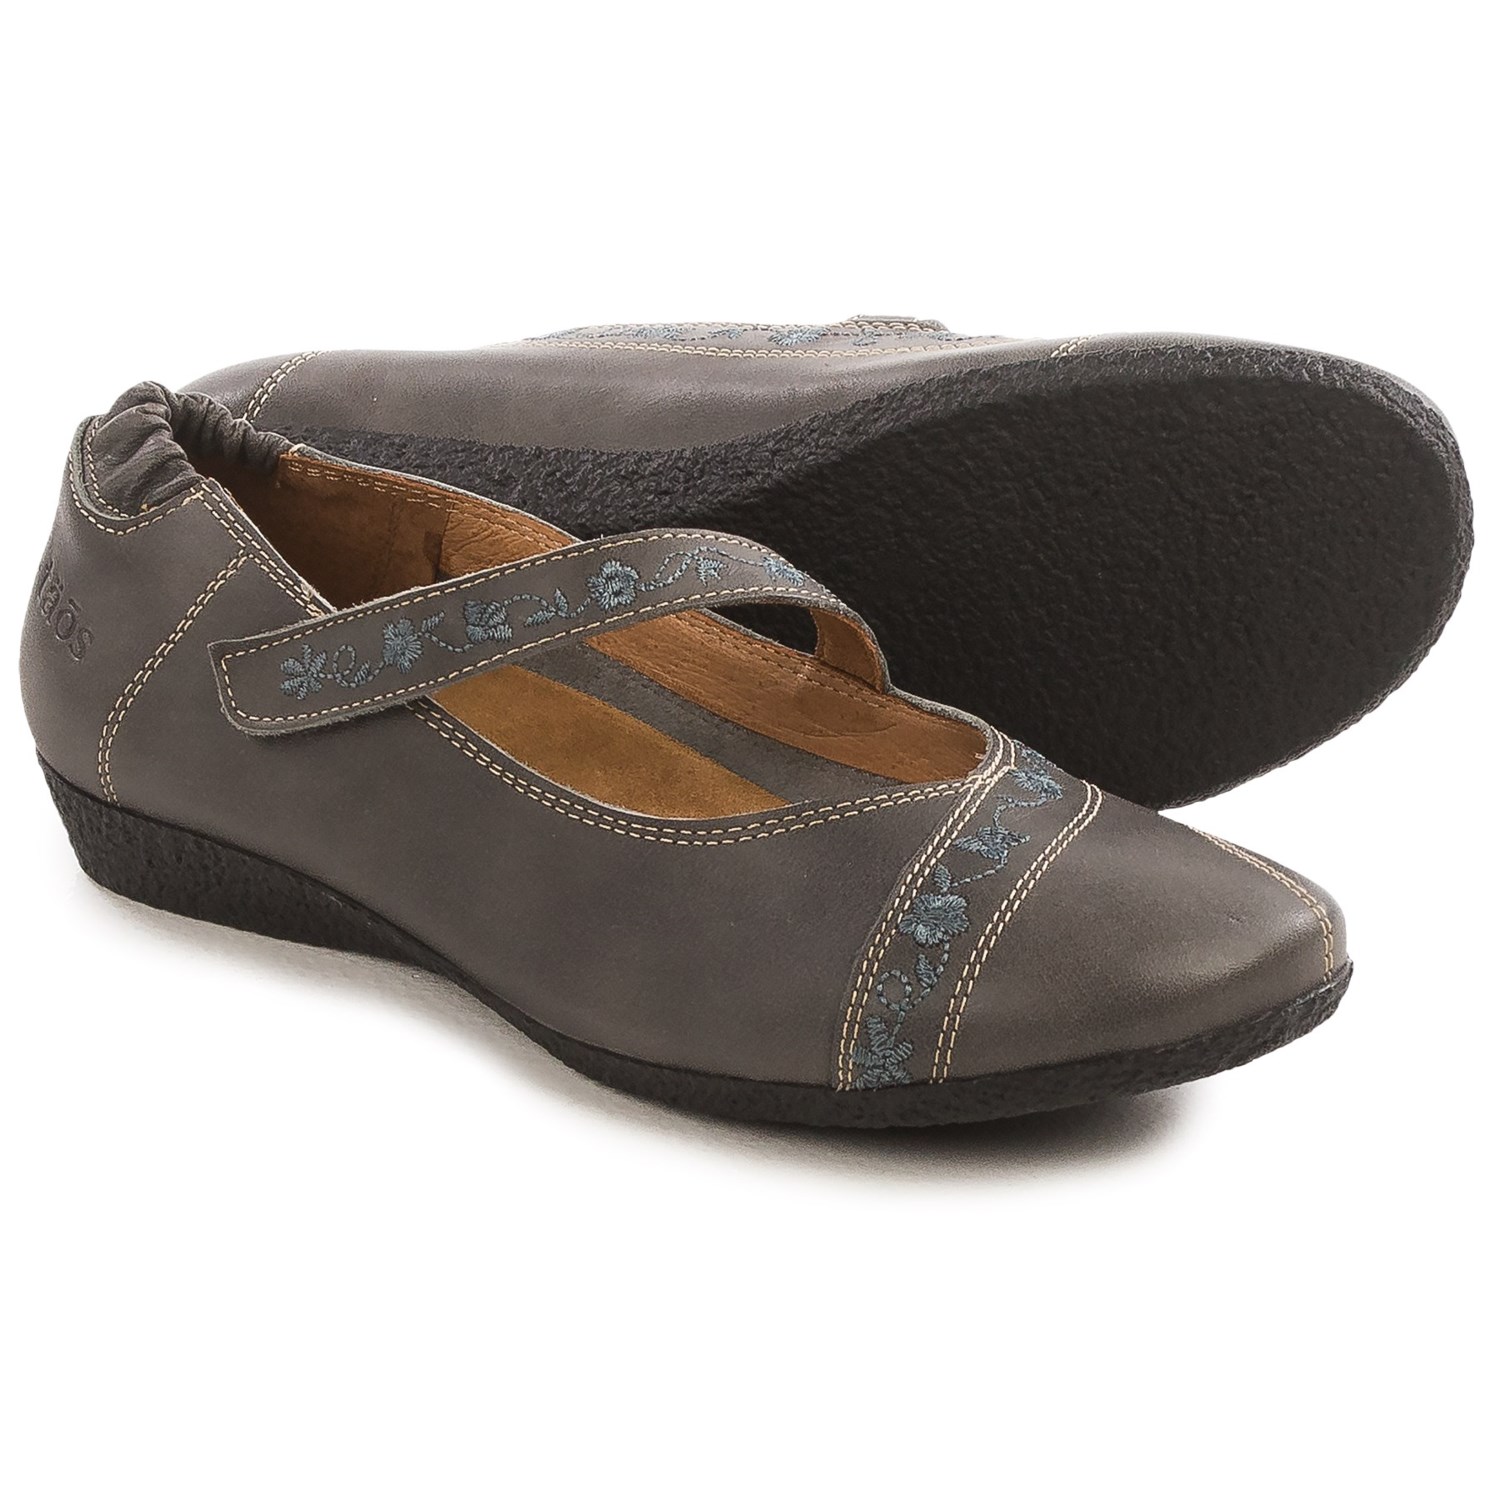 Taos Footwear Grace Mary Jane Shoes (For Women) - Save 76%